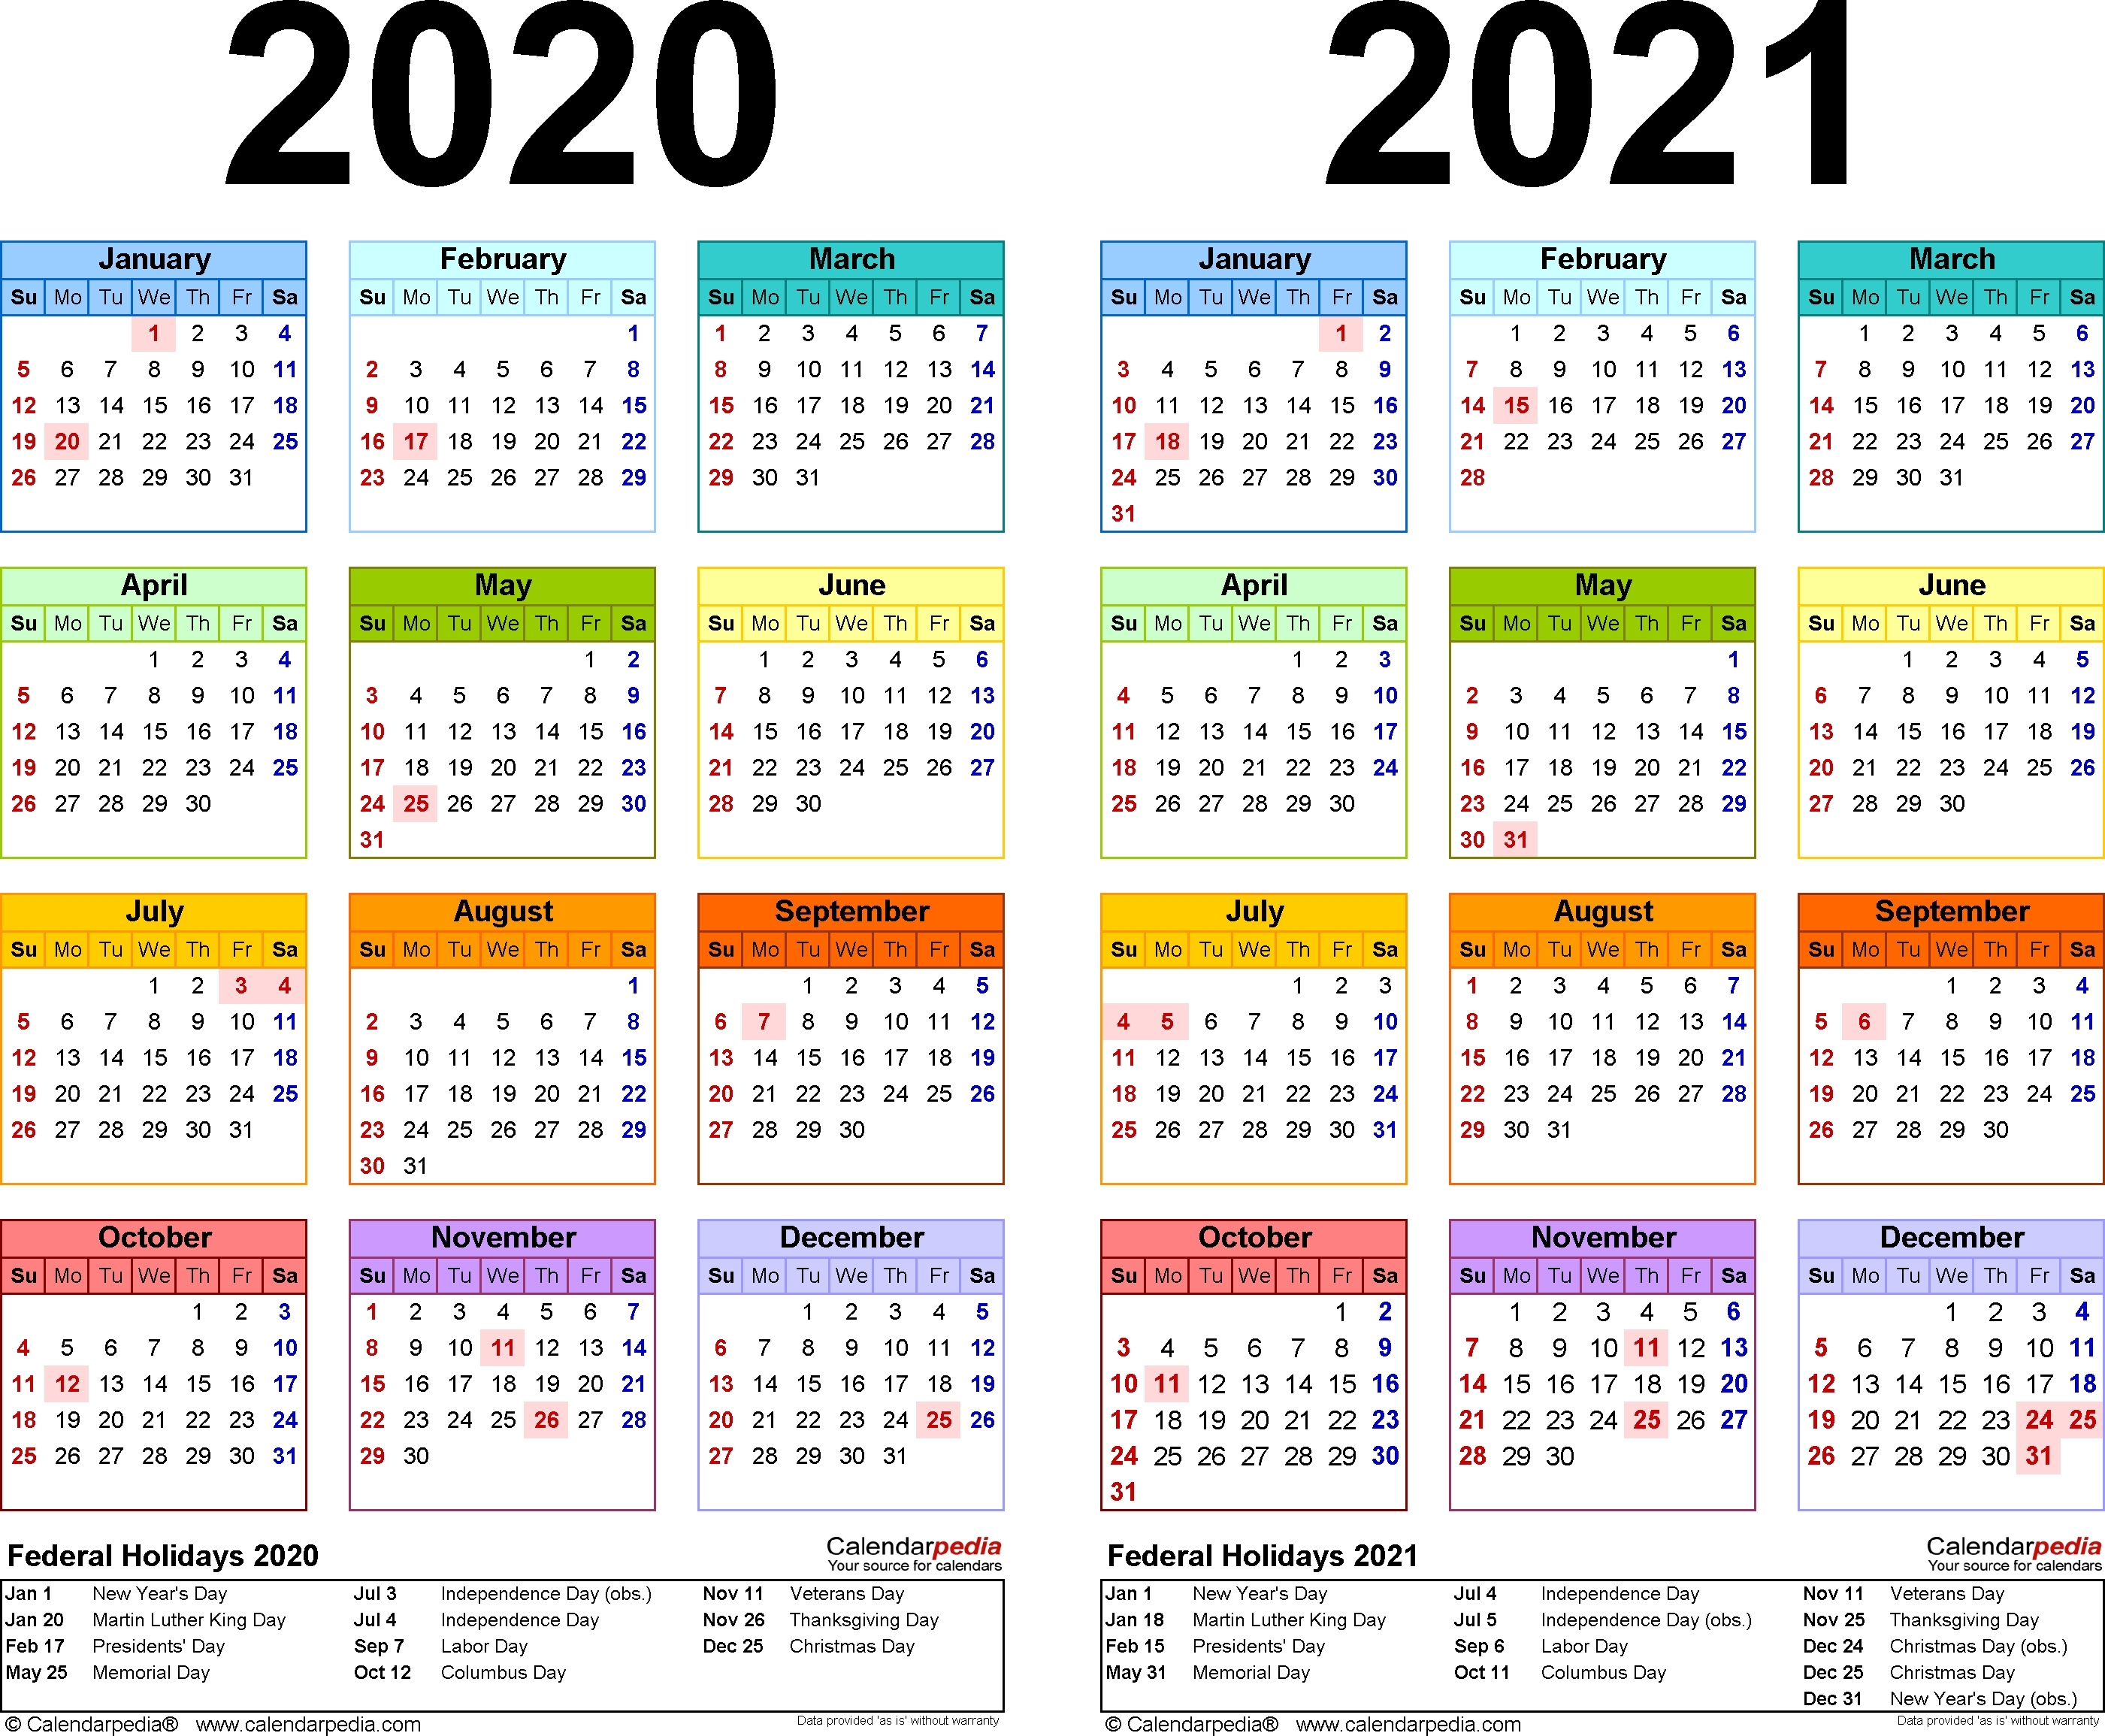 Incredible 2020 Calendar Philippines With Holidays-Philippine Holidays 2020 Calendar